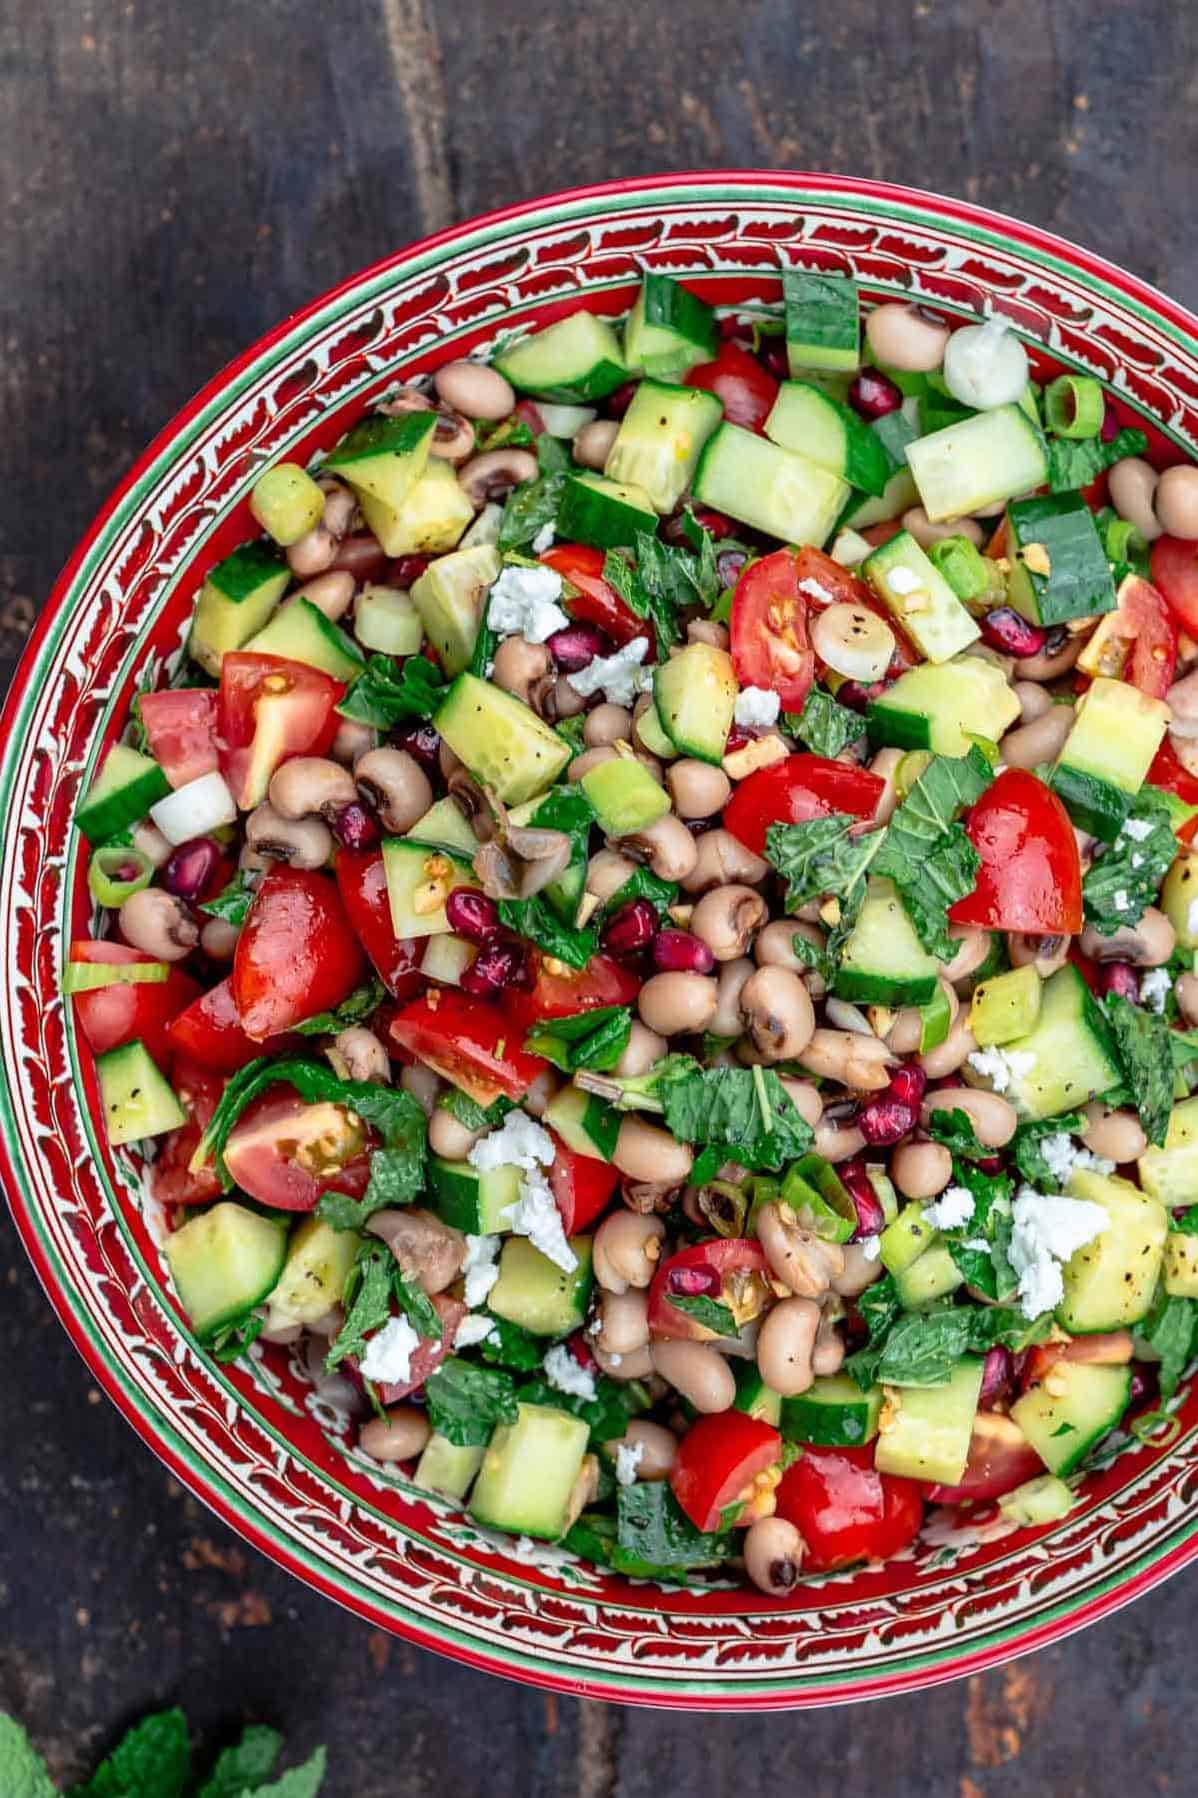  This colorful salad will bring some sunshine to your table.